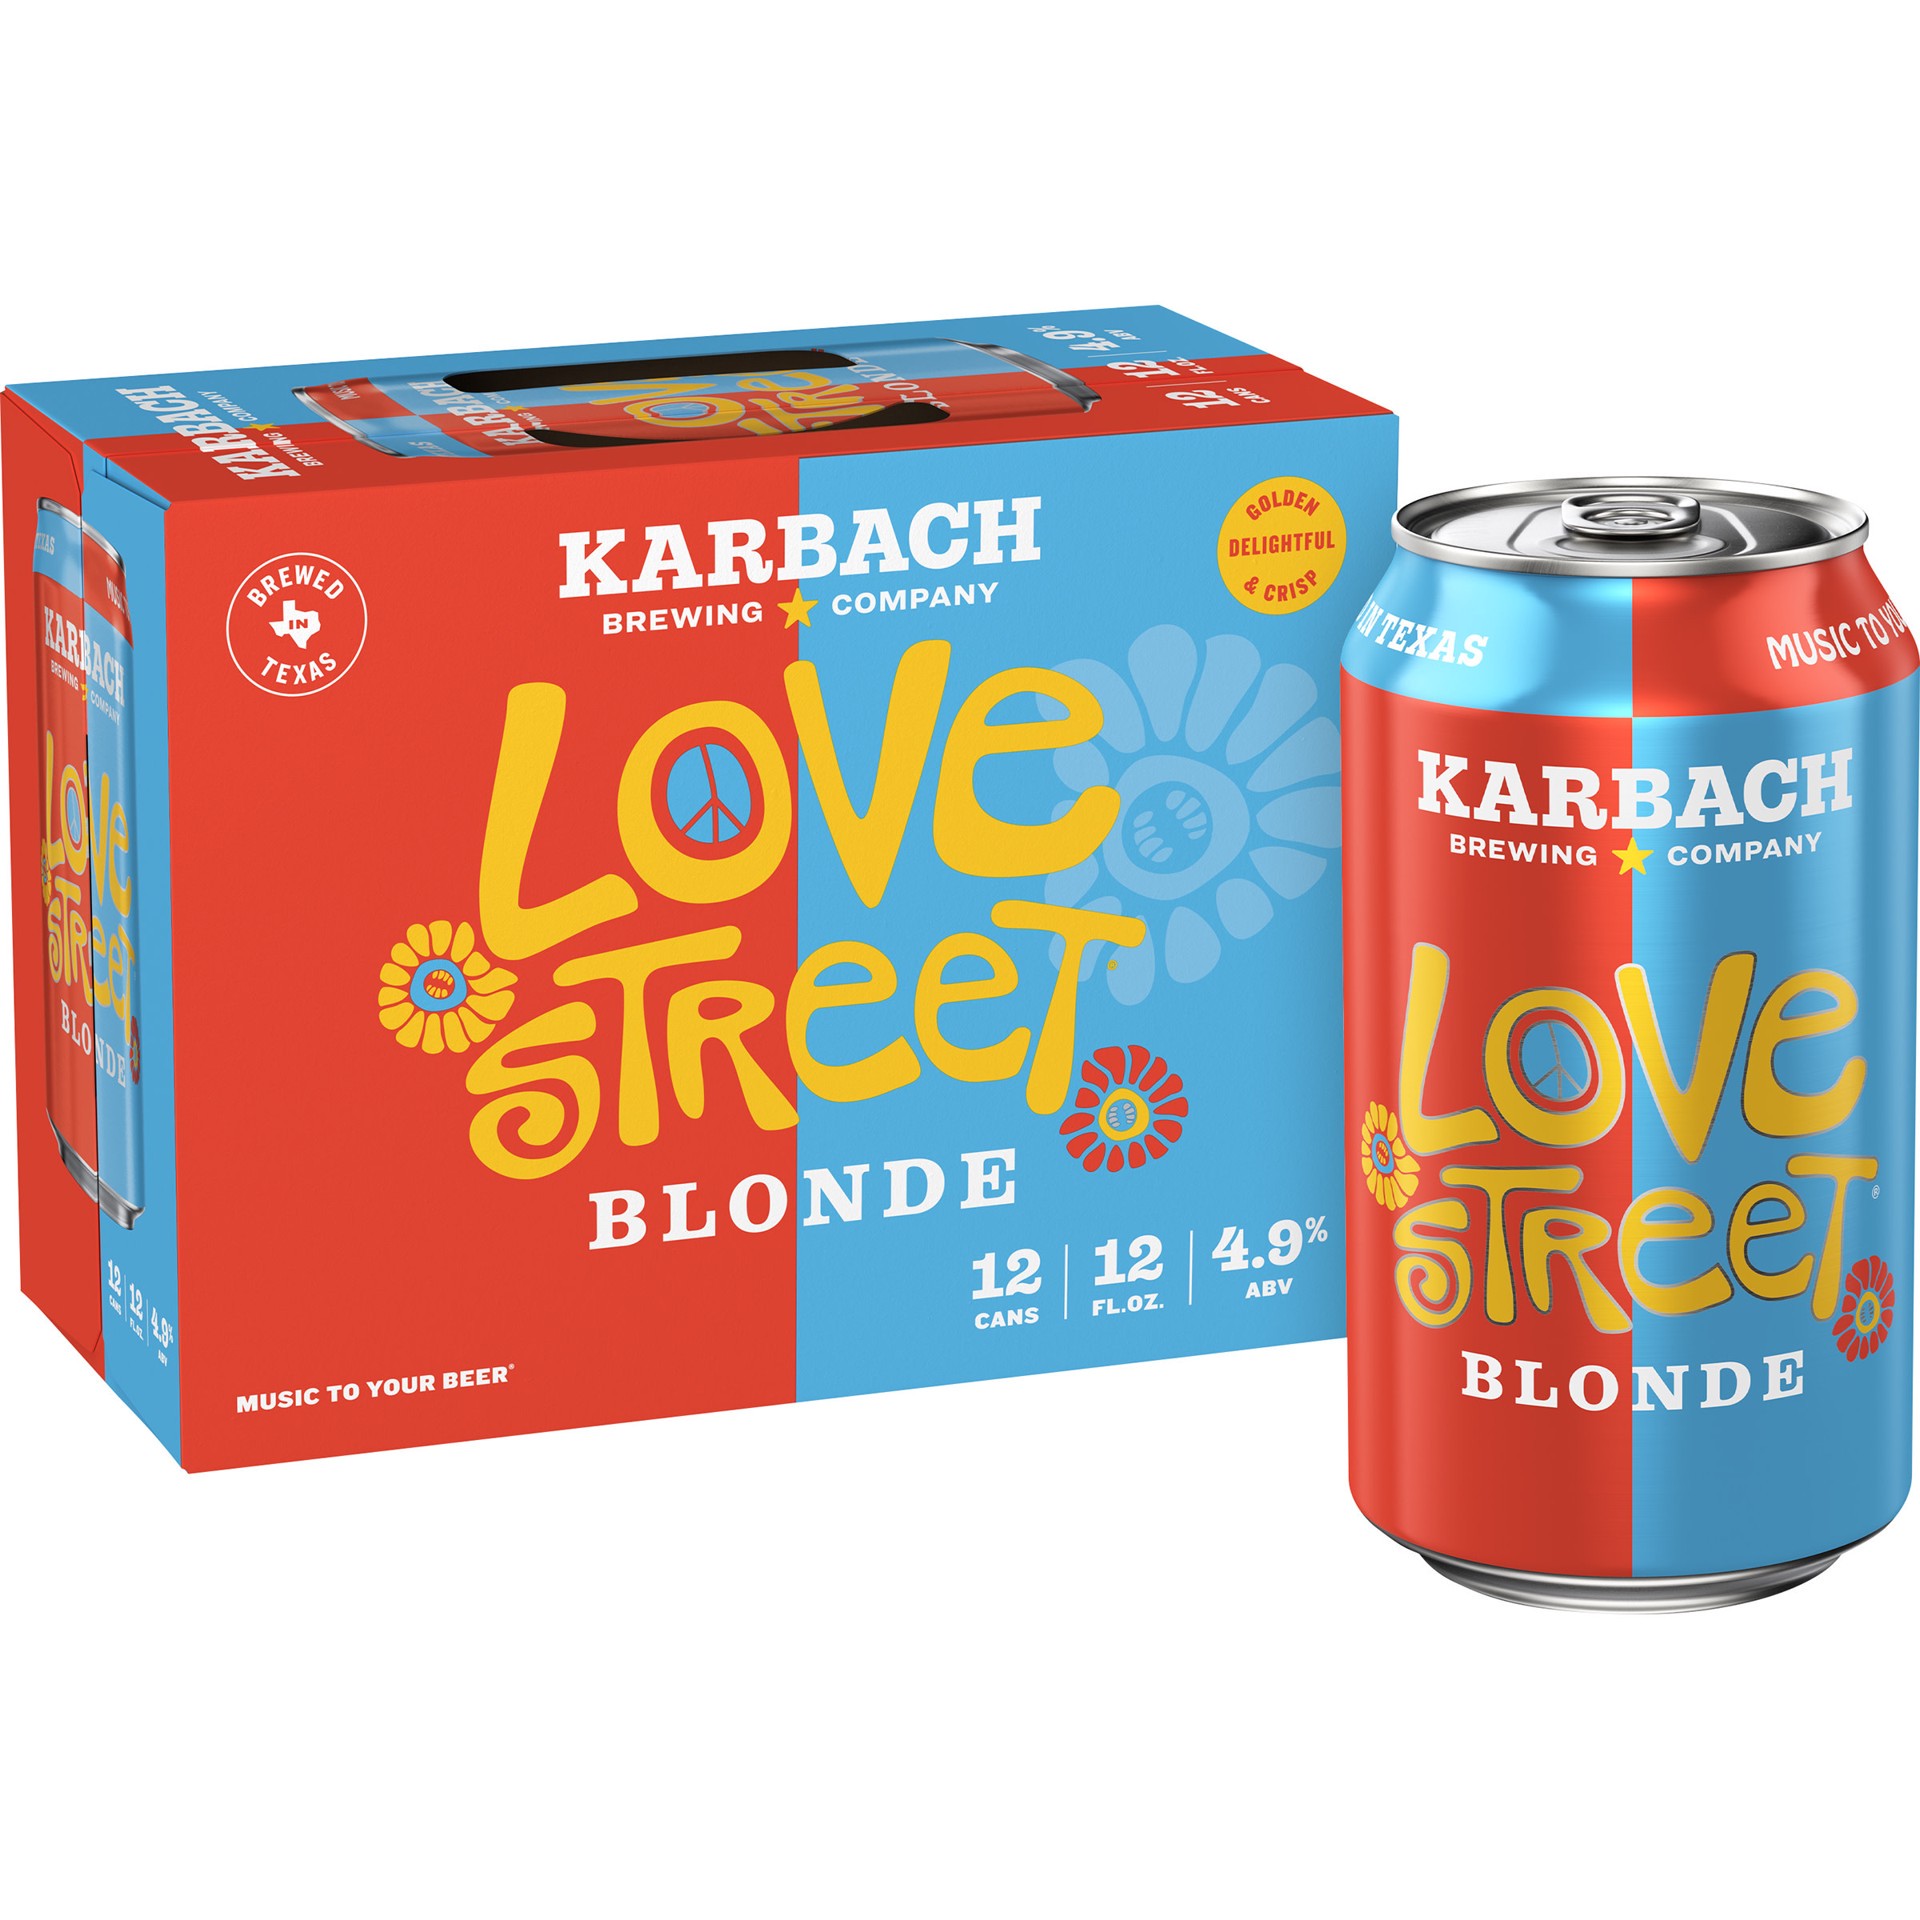 slide 3 of 3, Karbach Brewing Company Karbach Brewing Co. Love Street Blonde Beer, 12 Pack 12 FL OZ Cans, 12 ct